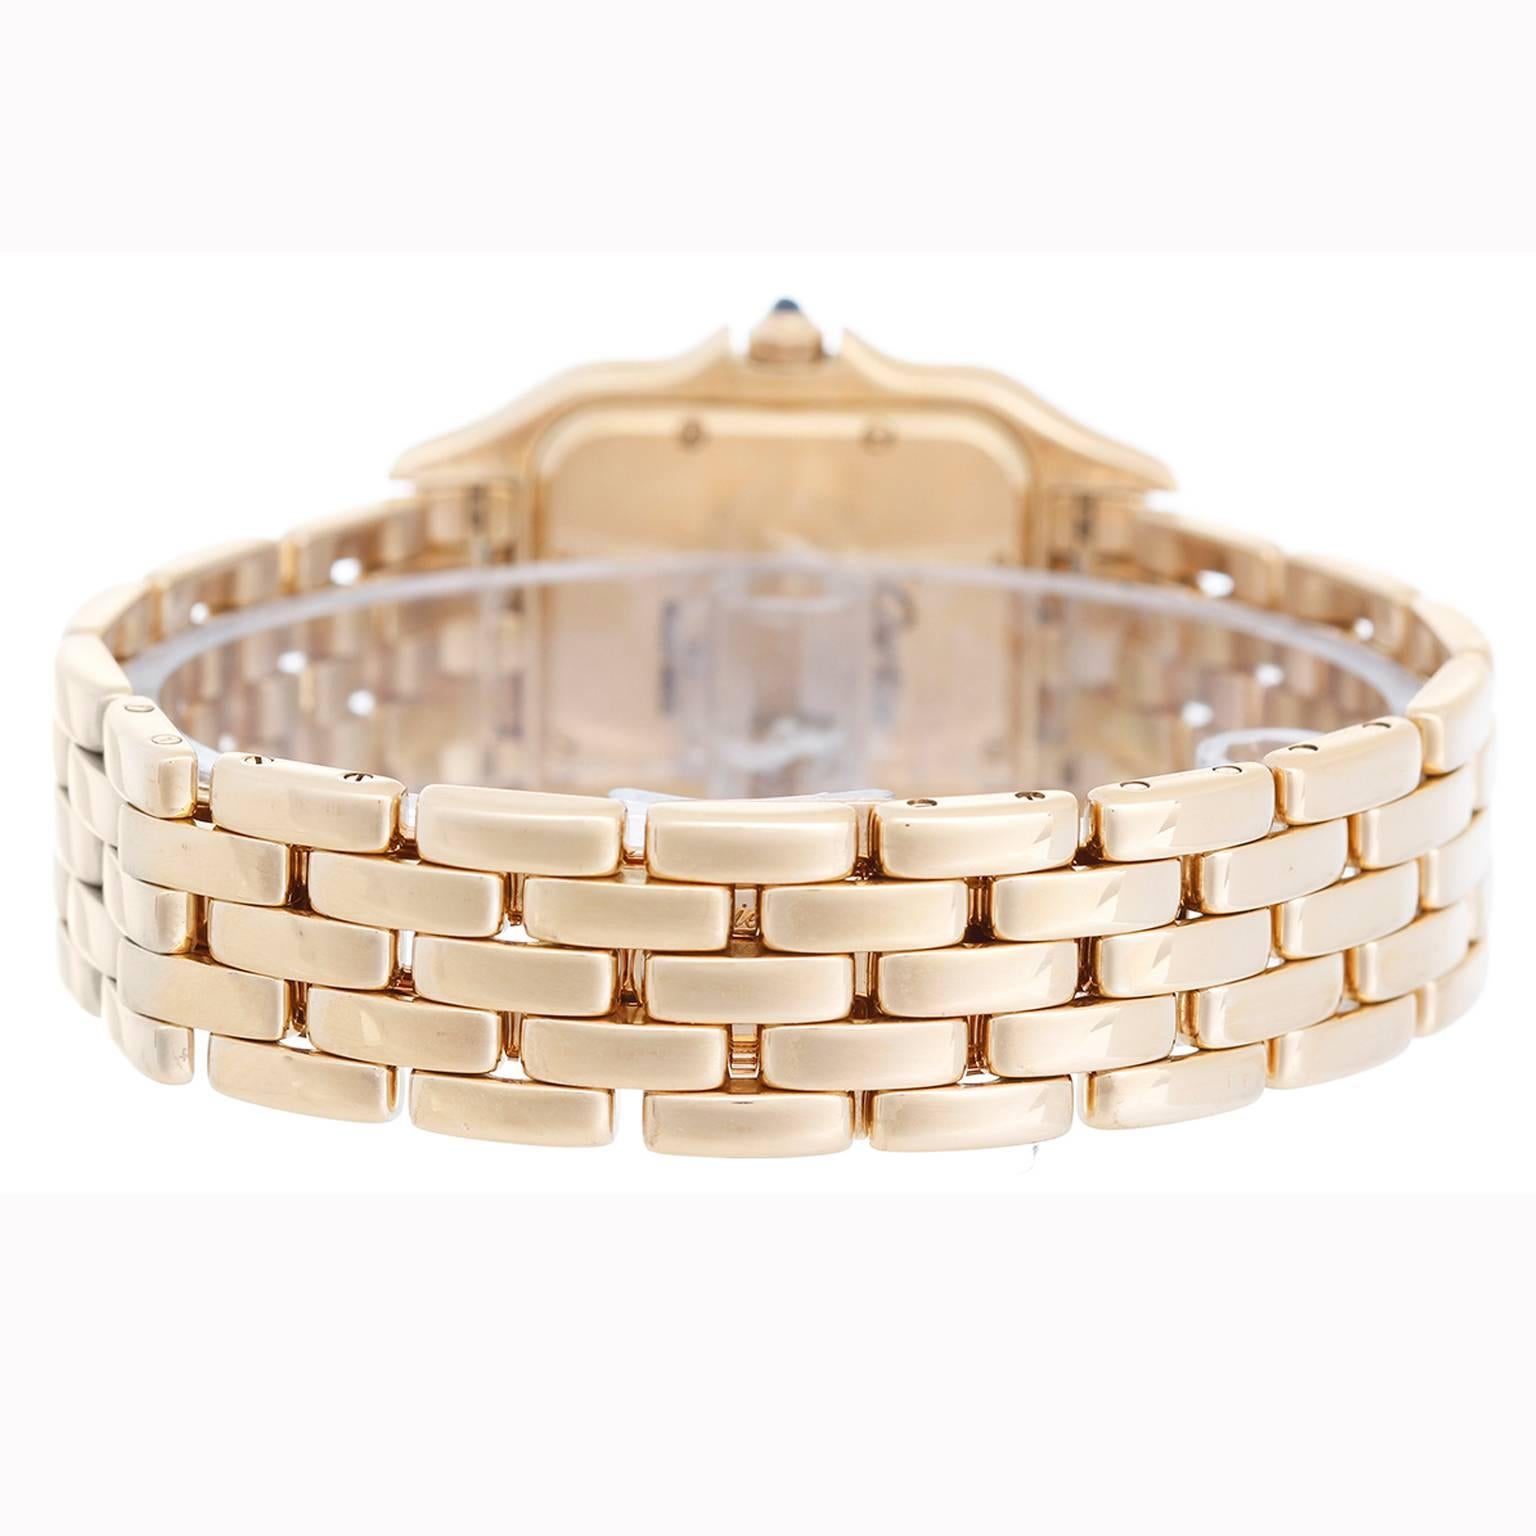 Cartier Panther 18k Yellow Gold Ladies Quartz Midsize Watch with Date -  Quartz. 18k yellow gold case (27mm x 37mm). Ivory colored dial with black Roman numerals and date at 3 o'clock. 18k yellow gold Cartier Panther bracelet with deployant clasp.